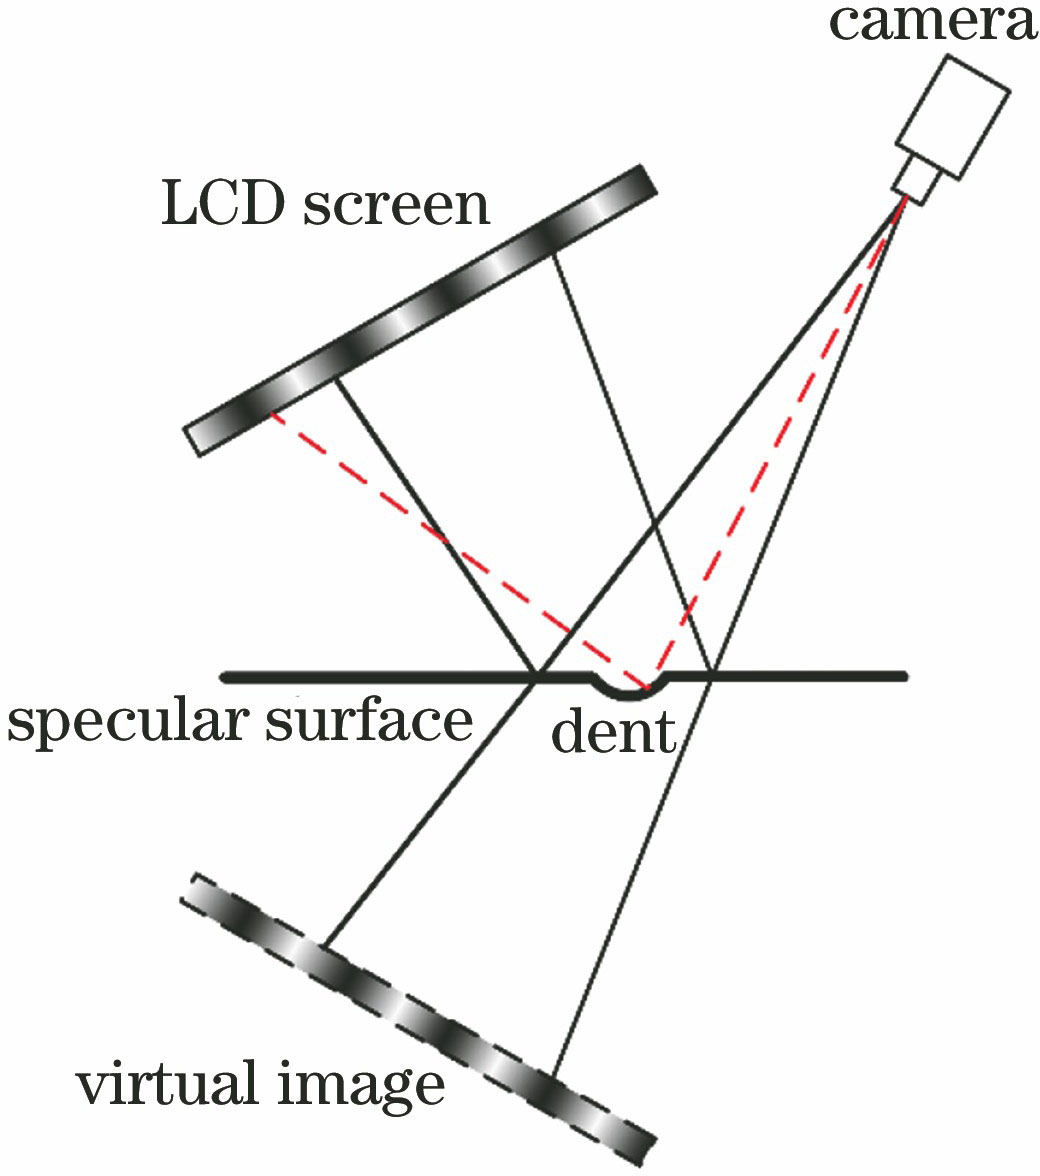 Schematic of mirror surface defect detection based on PMD